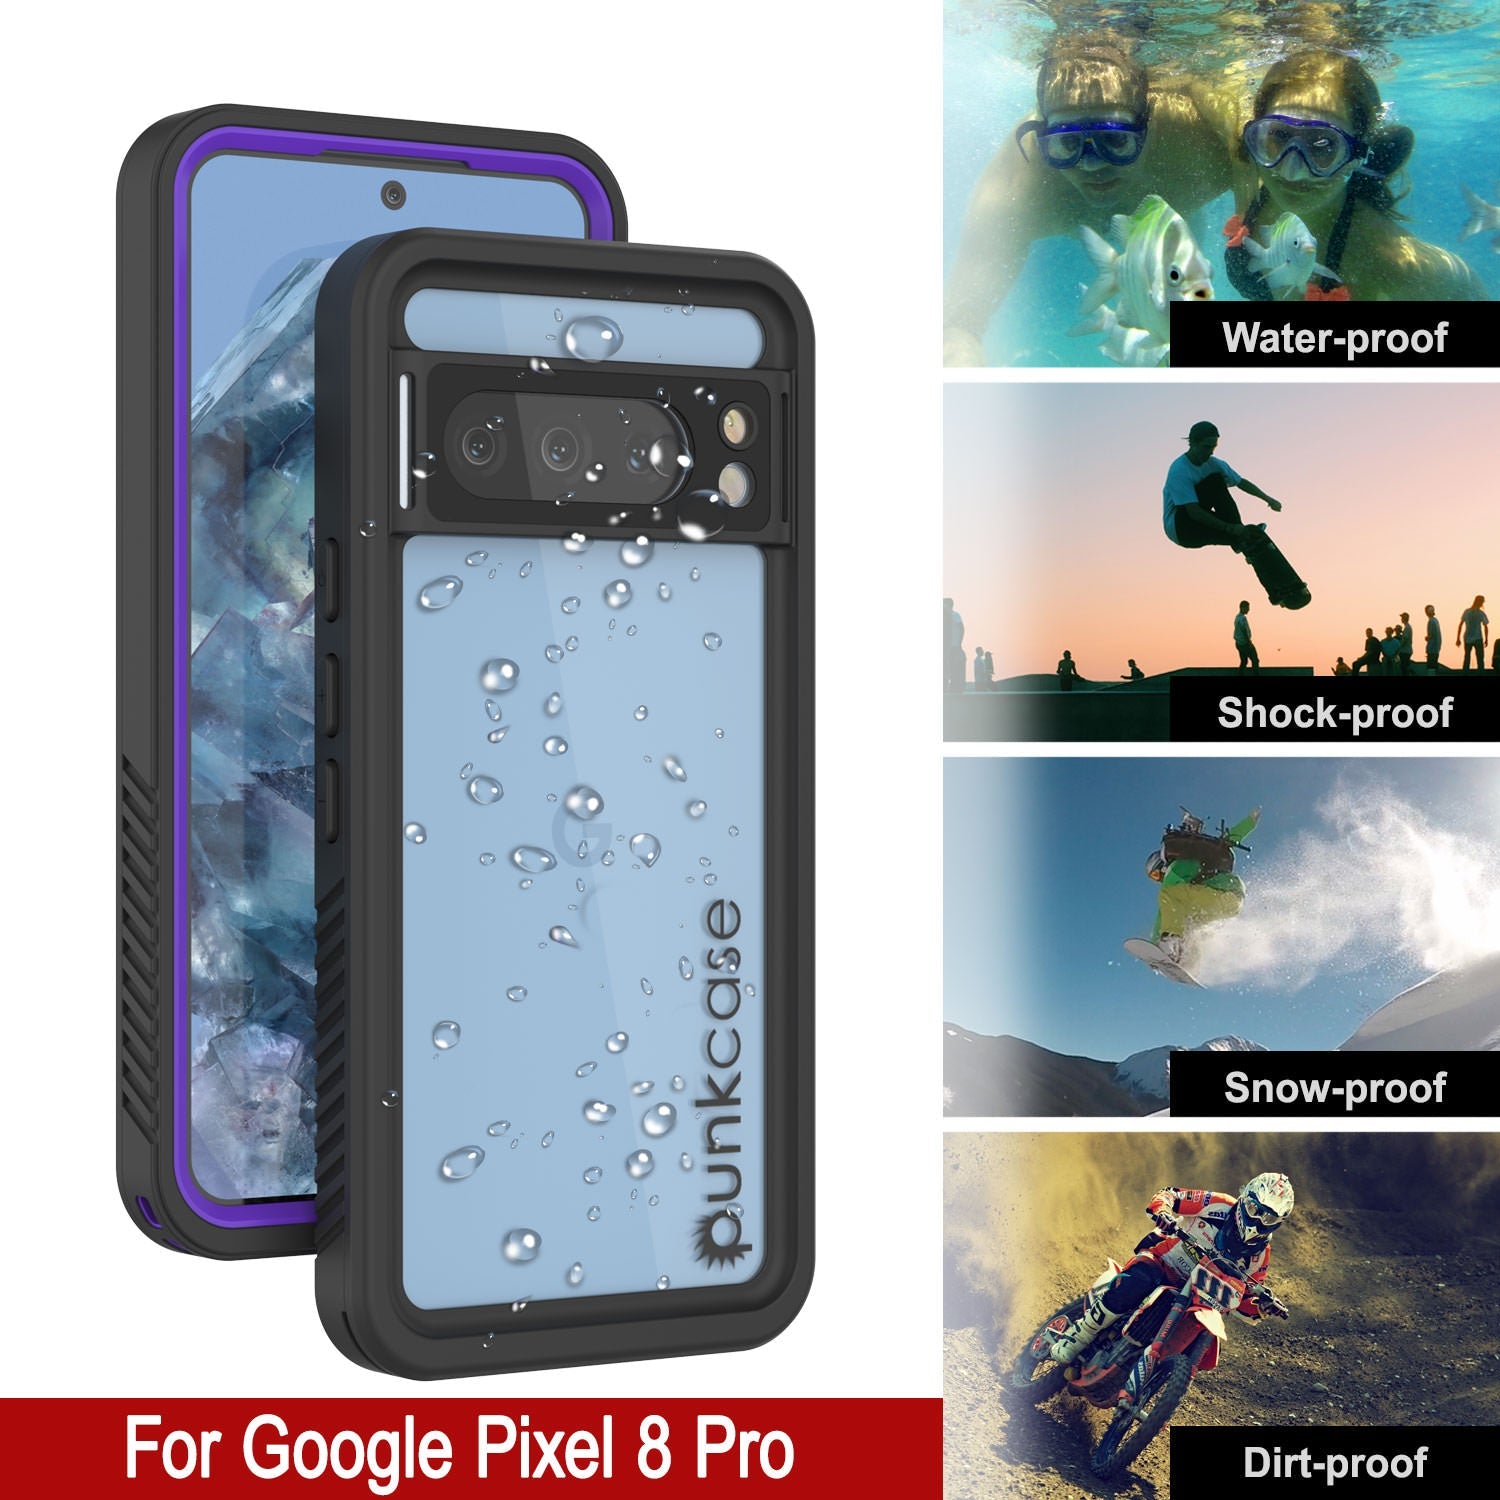 Google Pixel 8 Pro Waterproof Case, Punkcase [Extreme Series] Armor Cover W/ Built In Screen Protector [Purple]